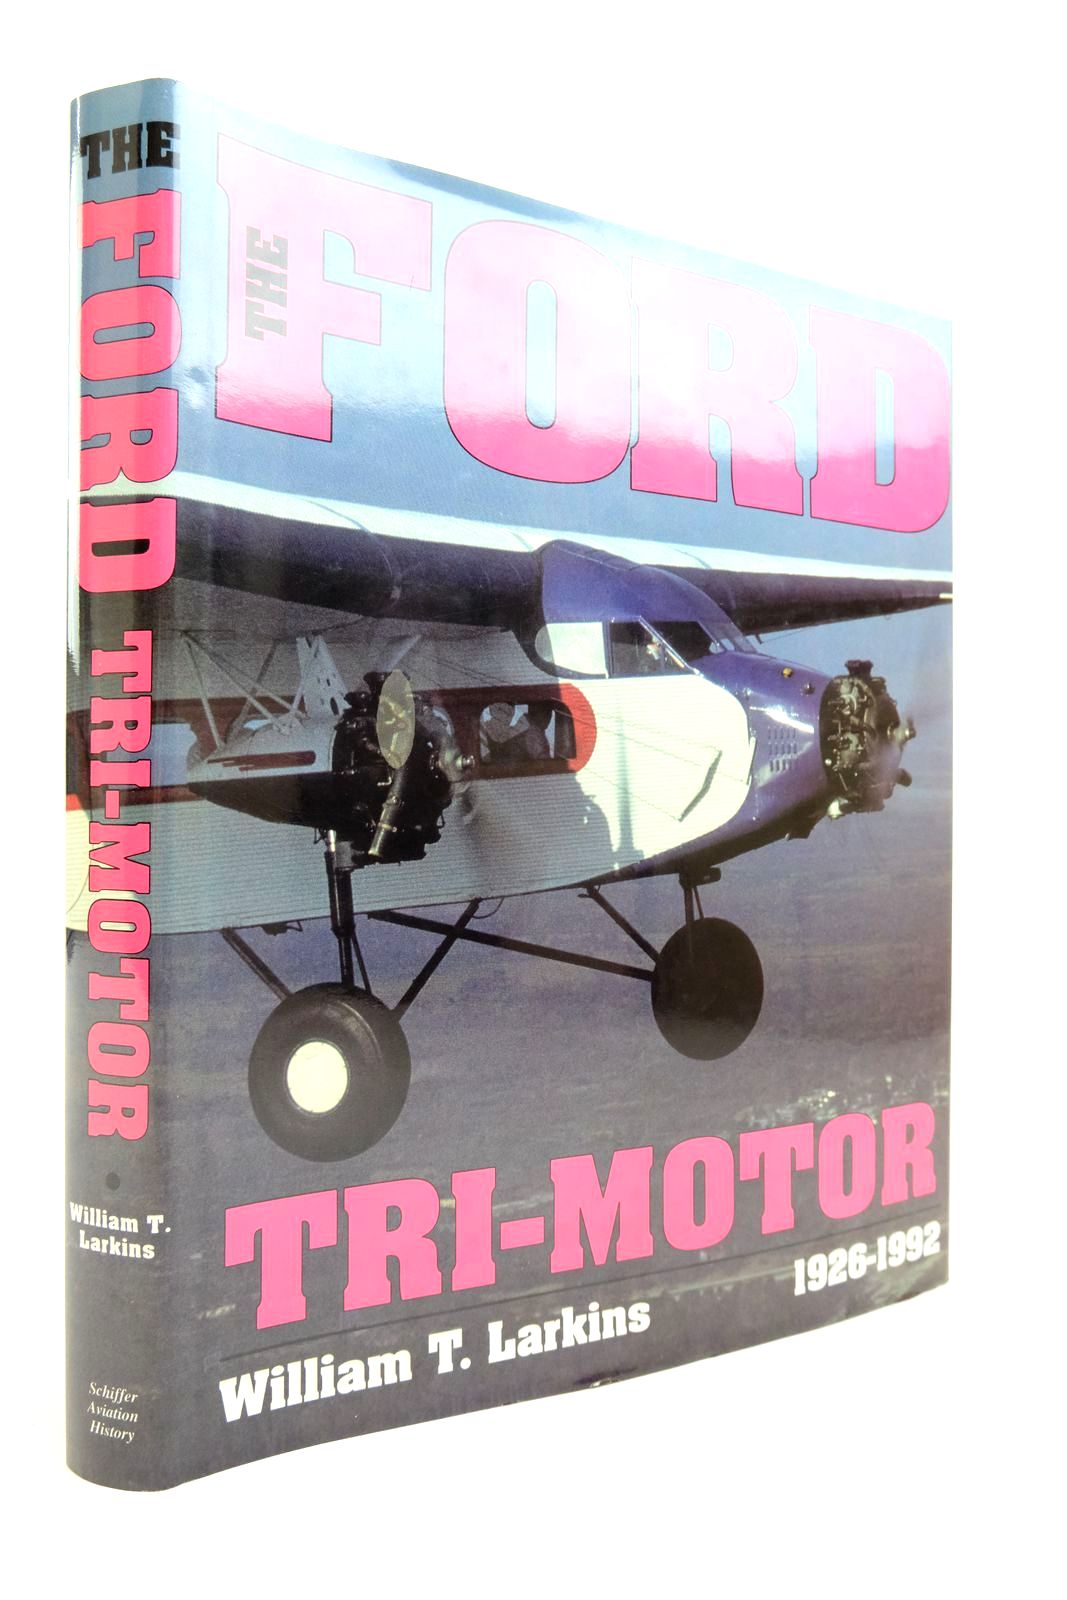 Photo of THE FORD TRI-MOTOR 1926-1992 written by Larkins, William T. published by Schiffer Aviation History (STOCK CODE: 2139391)  for sale by Stella & Rose's Books